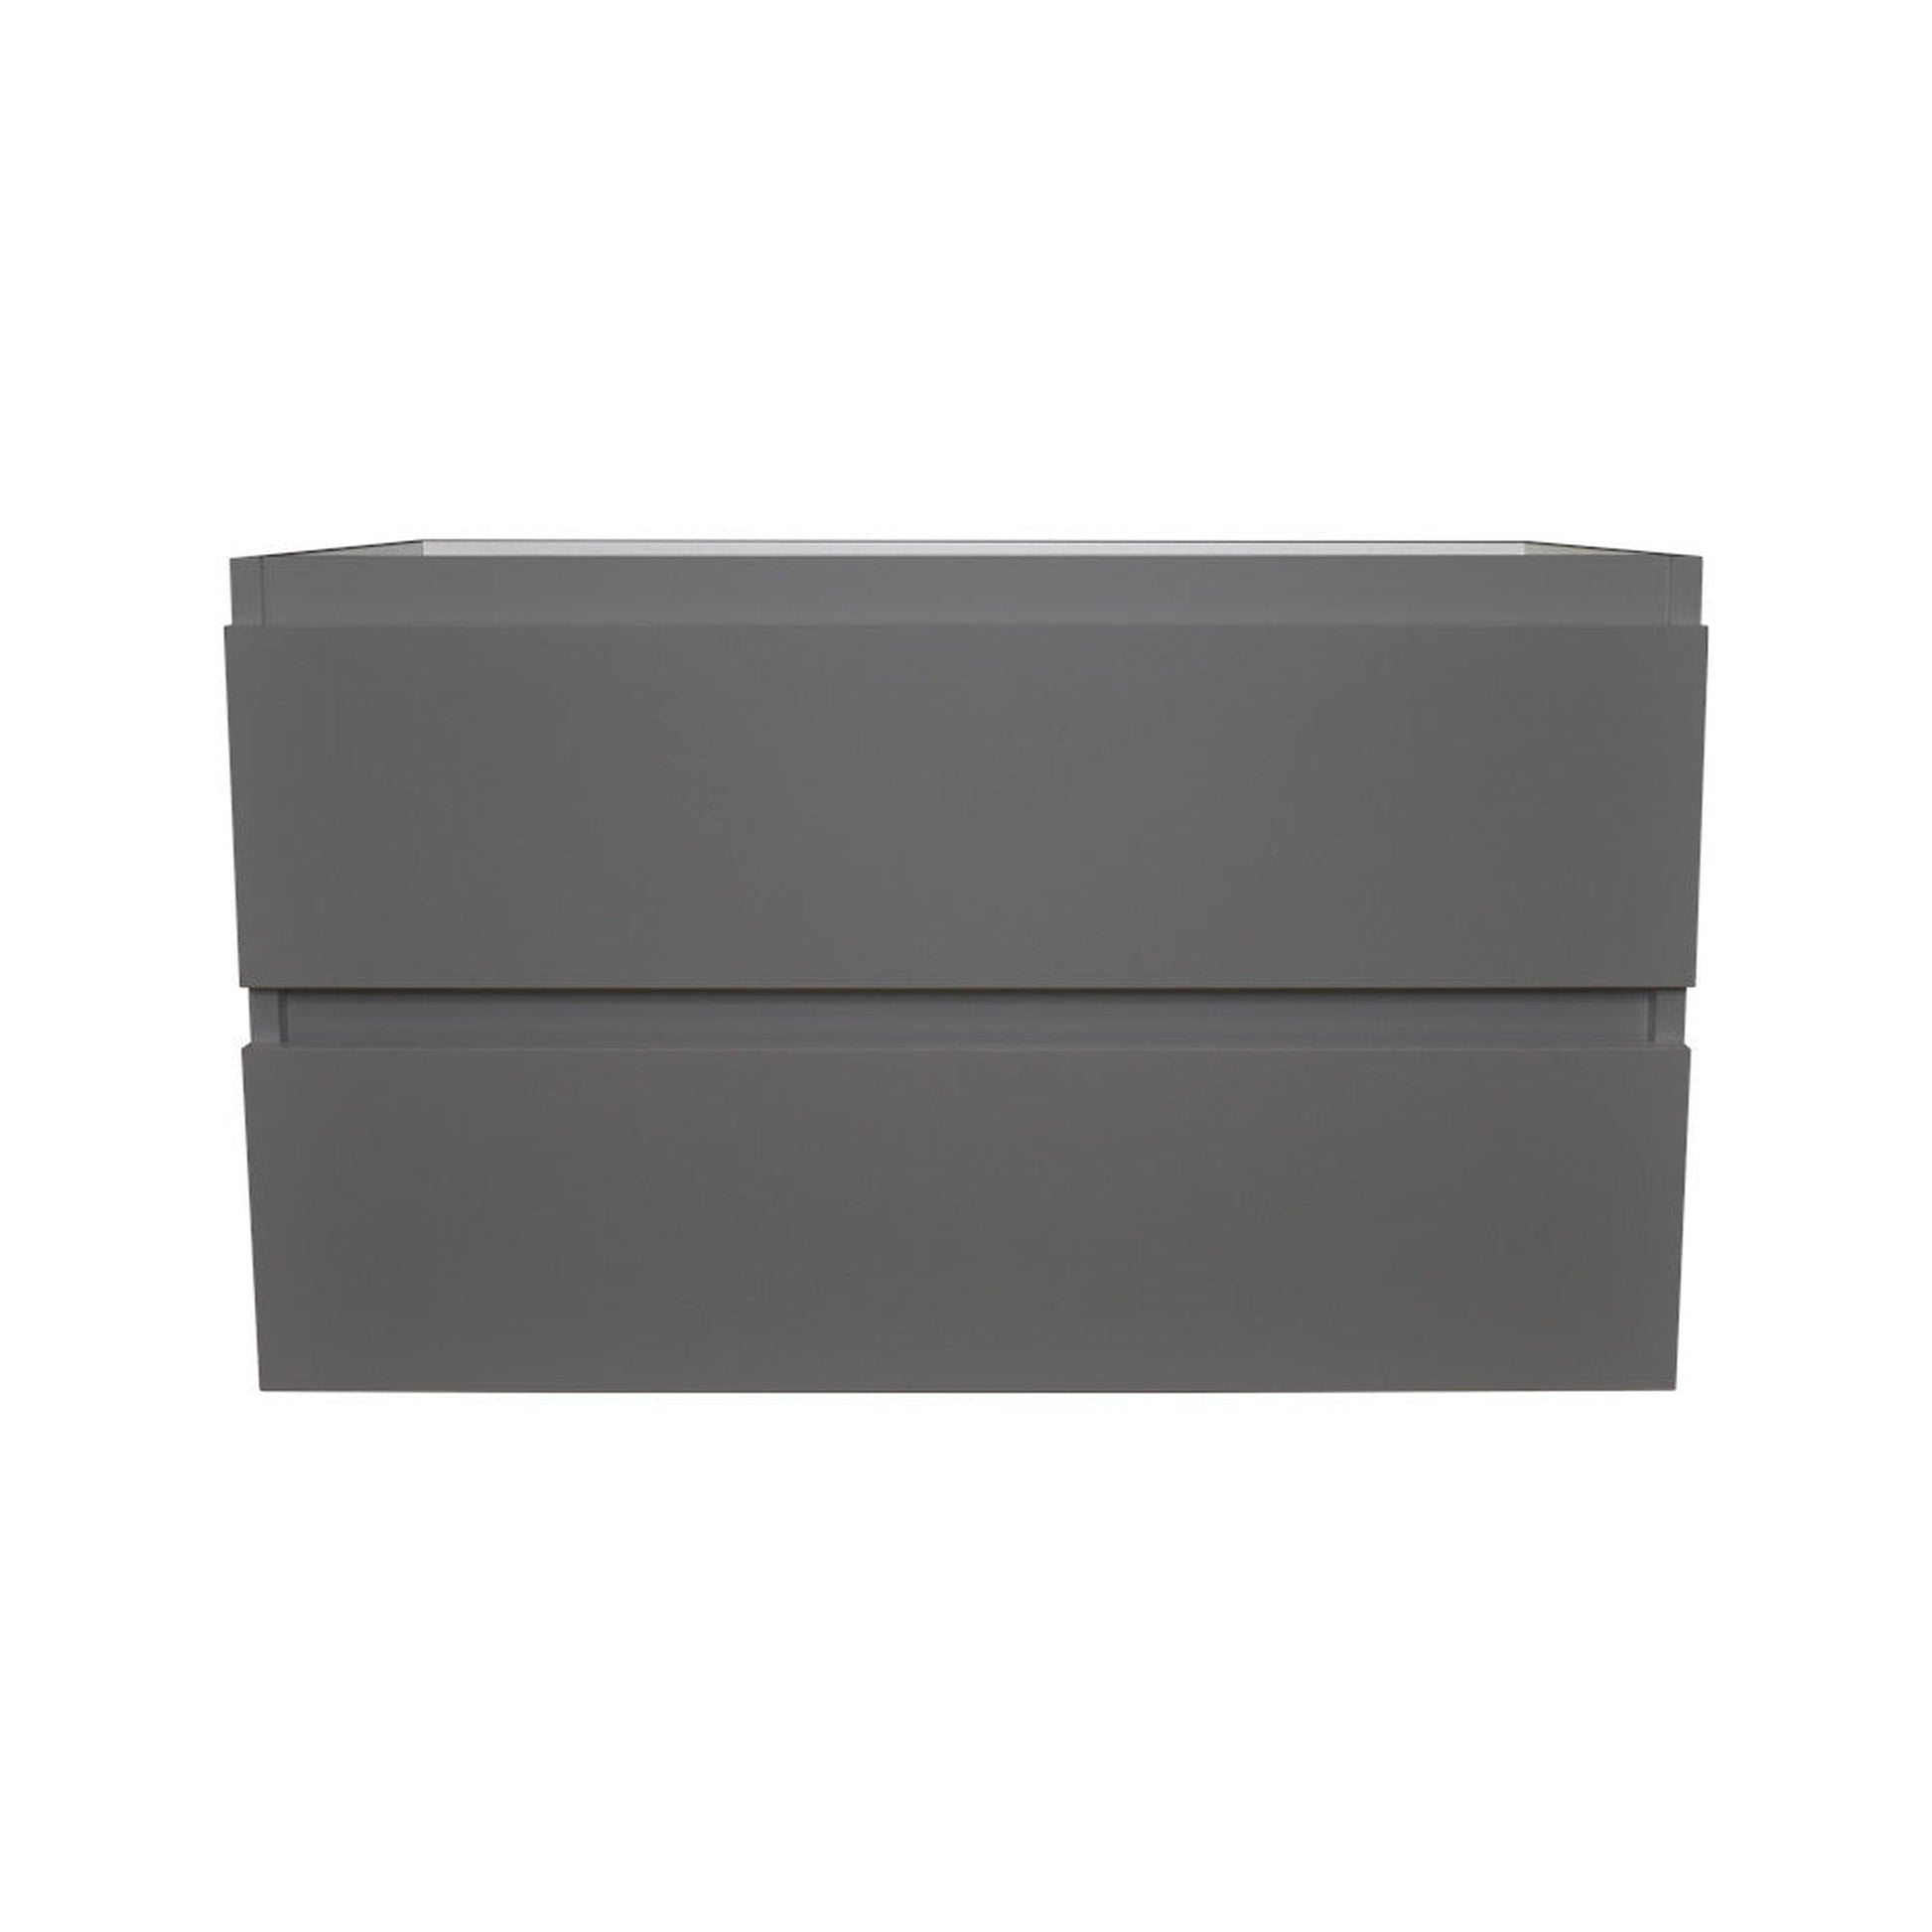 Volpa USA Salt 36" x 20" Gray Wall-Mounted Floating Bathroom Vanity Cabinet with Drawers